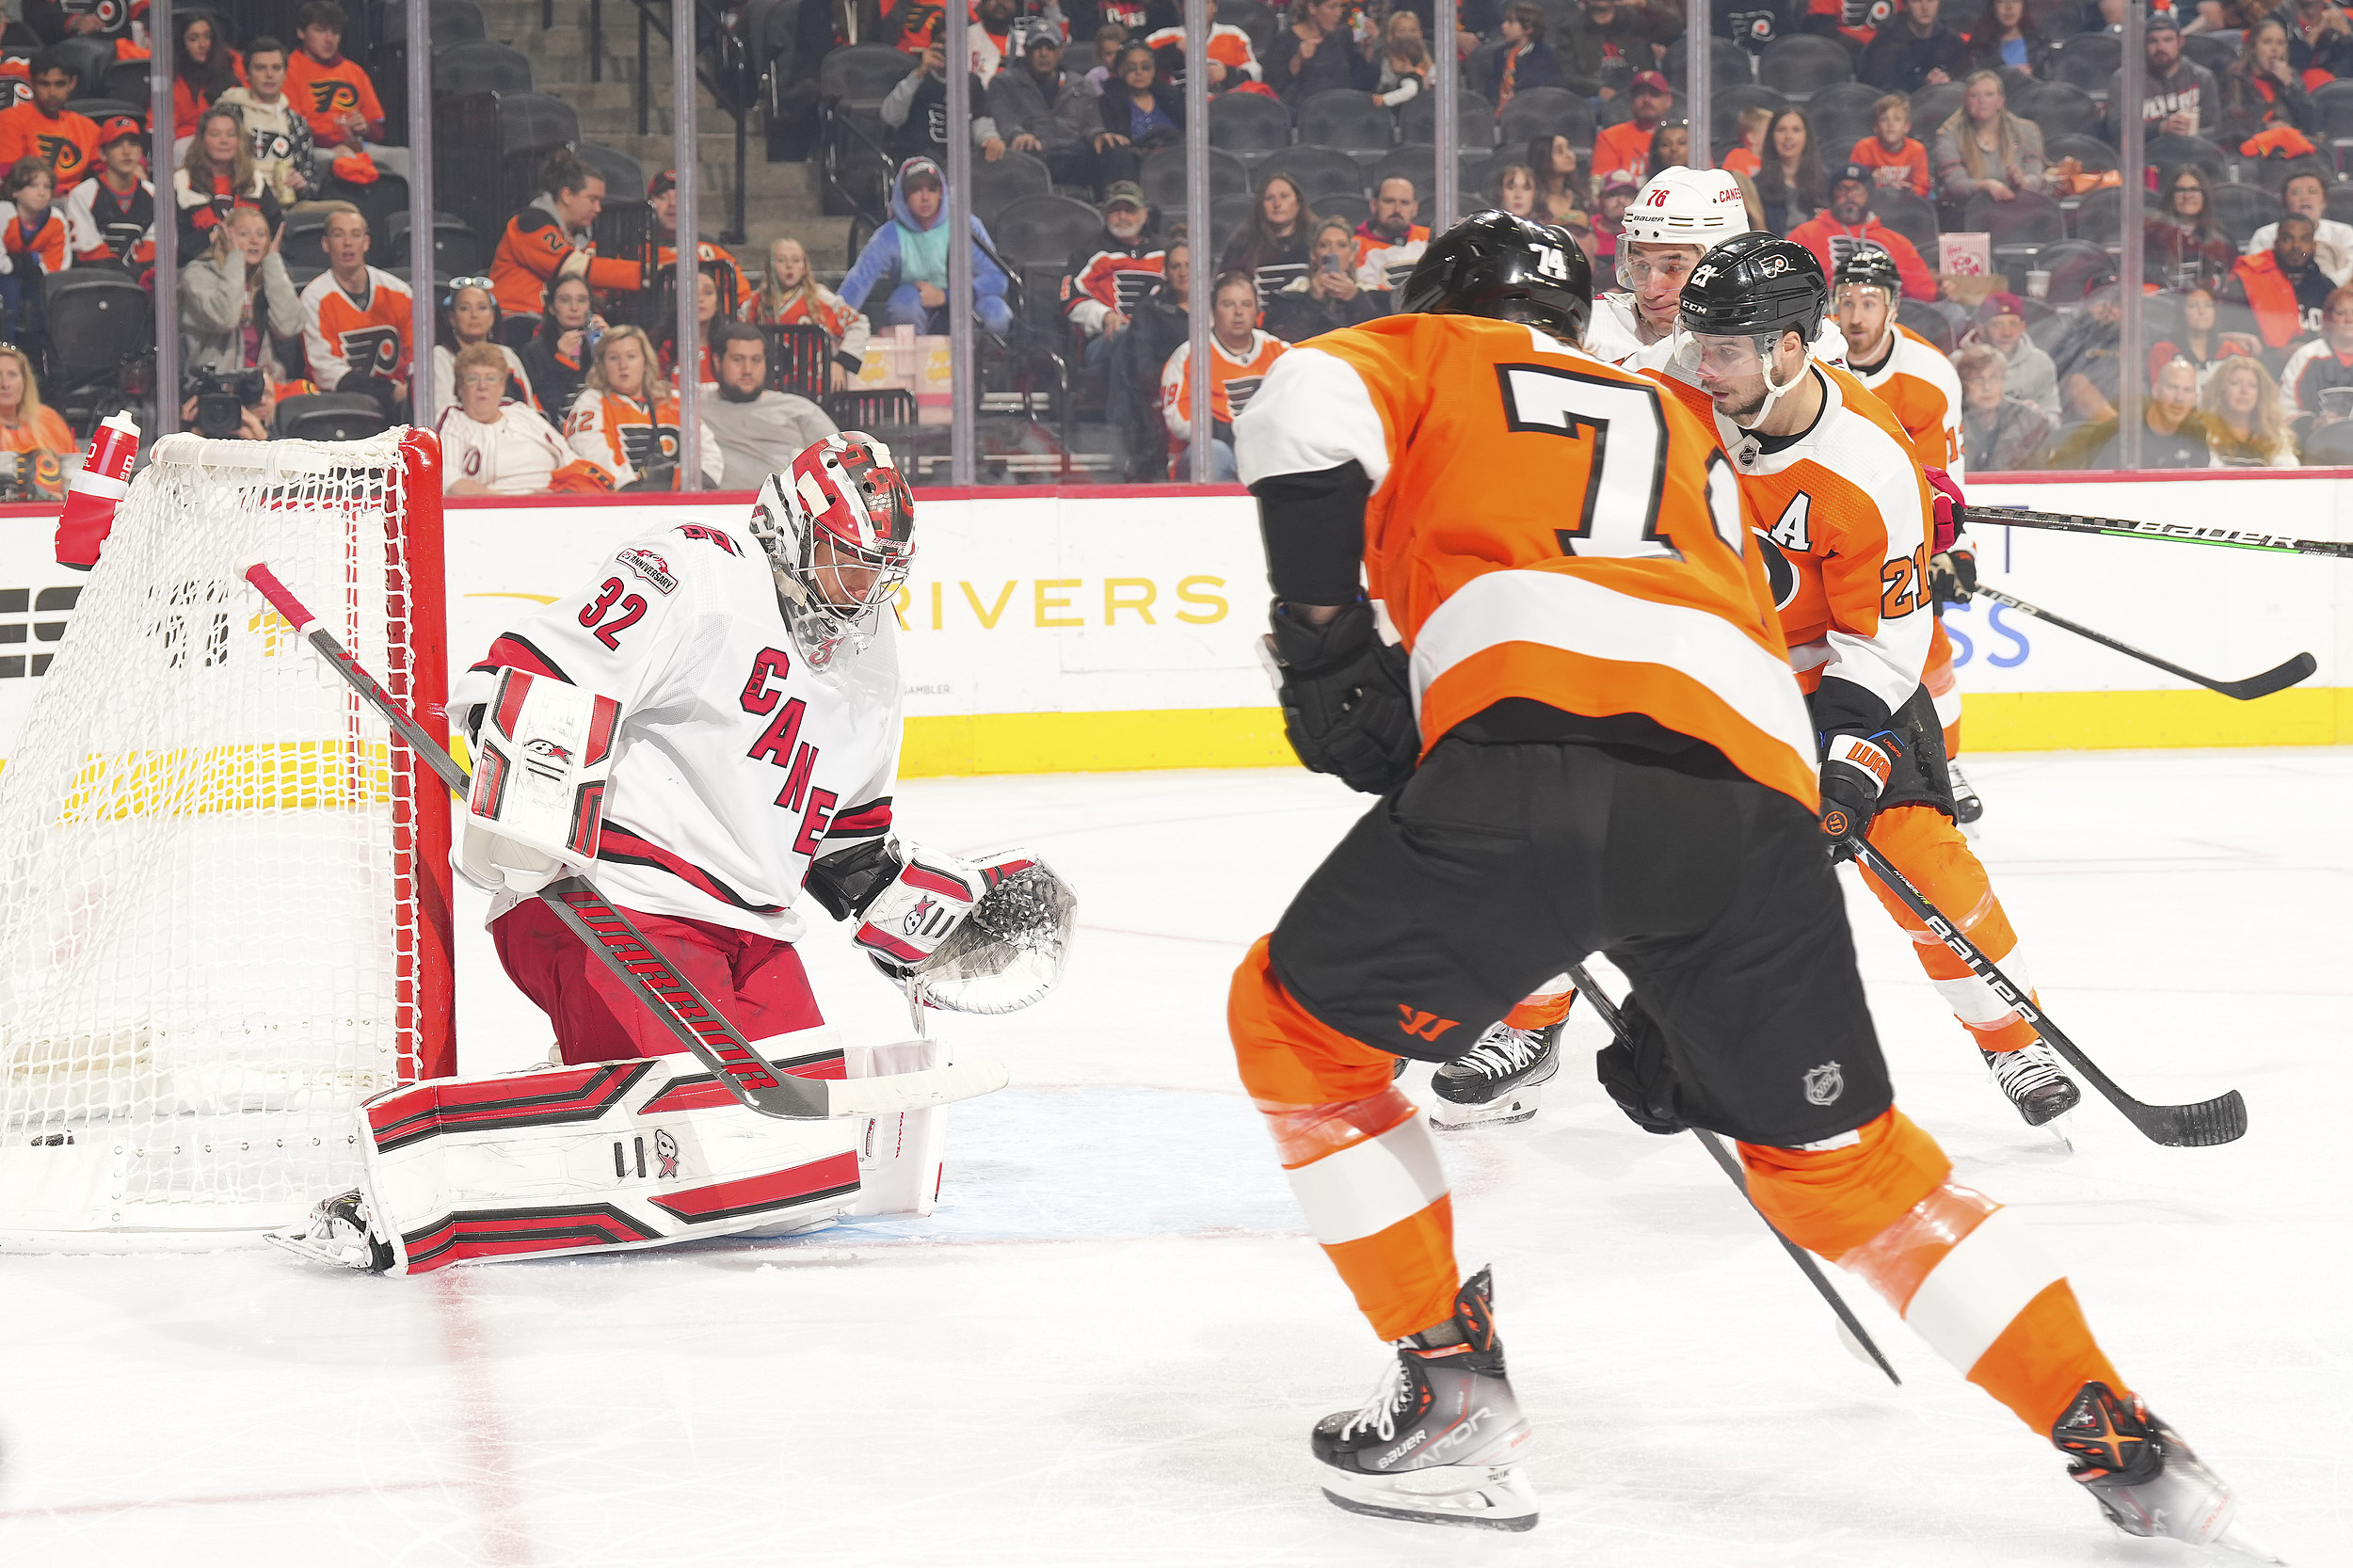 See photos of the Flyers taking on the Hurricanes